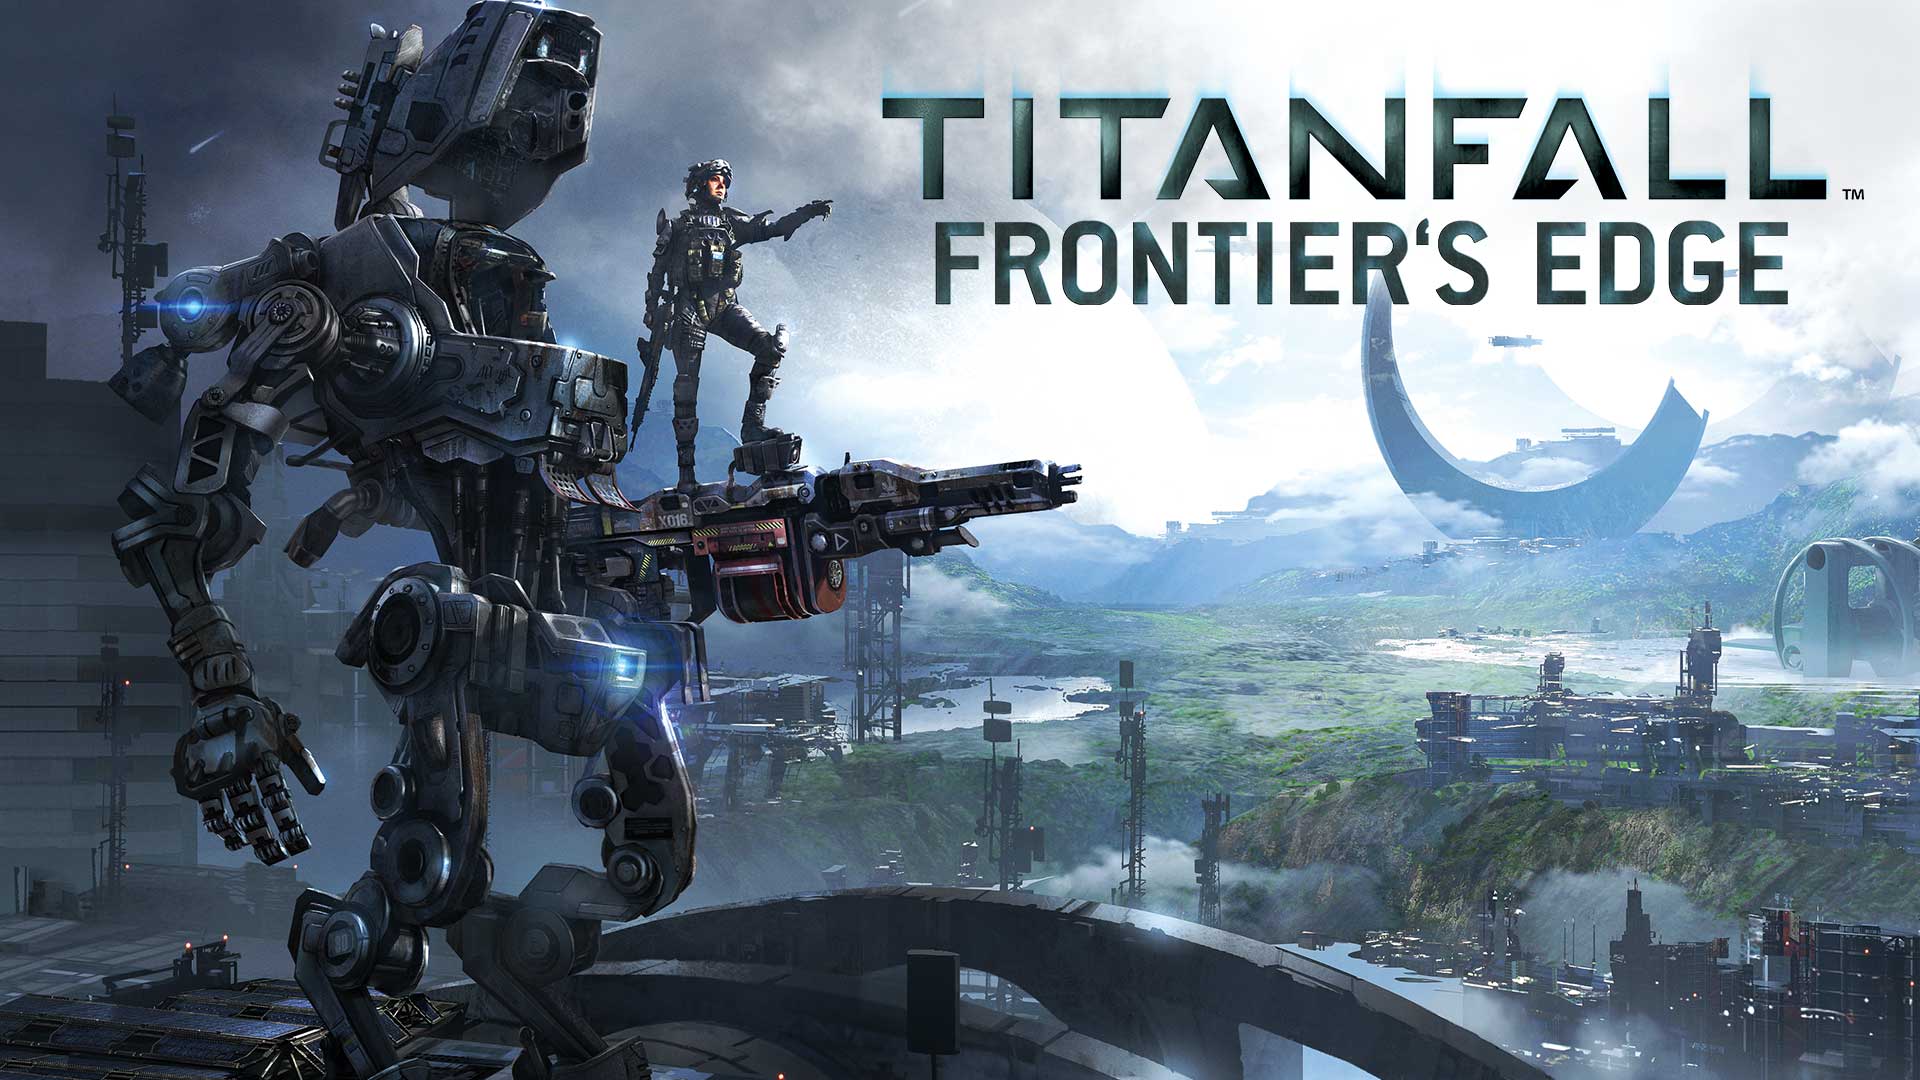 Media asset in full size related to 3dfxzone.it news item entitled as follows: Respawn annuncia il DLC Frontier's Edge per il game Titanfall | Image Name: news21400_Titanfall-Frontier-s-Edge_1.jpg